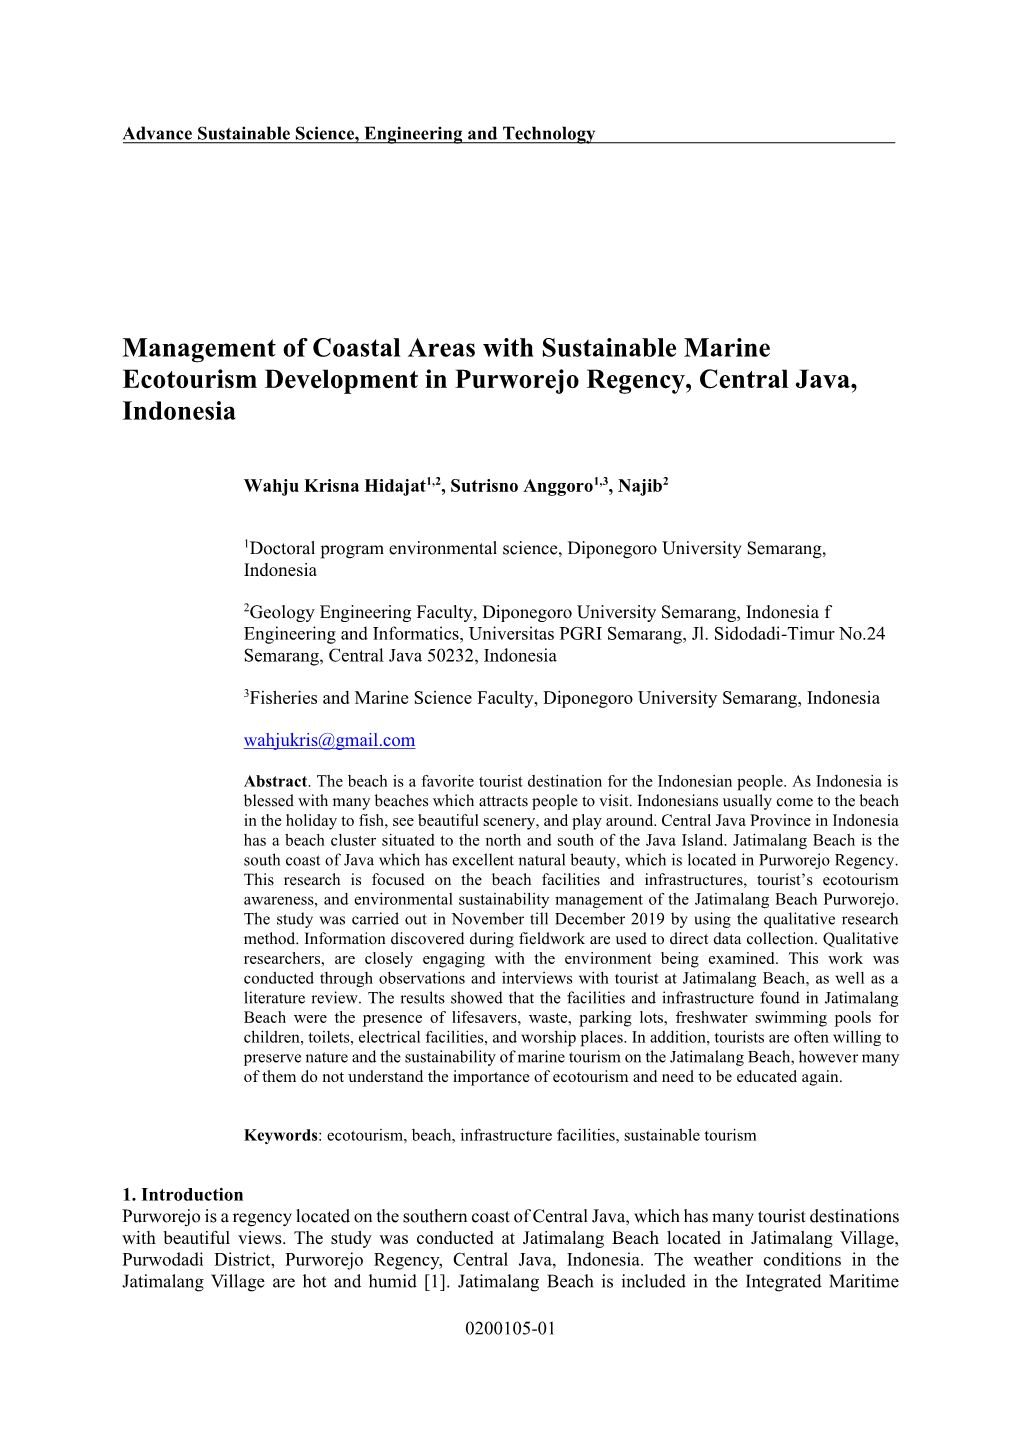 Management of Coastal Areas with Sustainable Marine Ecotourism Development in Purworejo Regency, Central Java, Indonesia